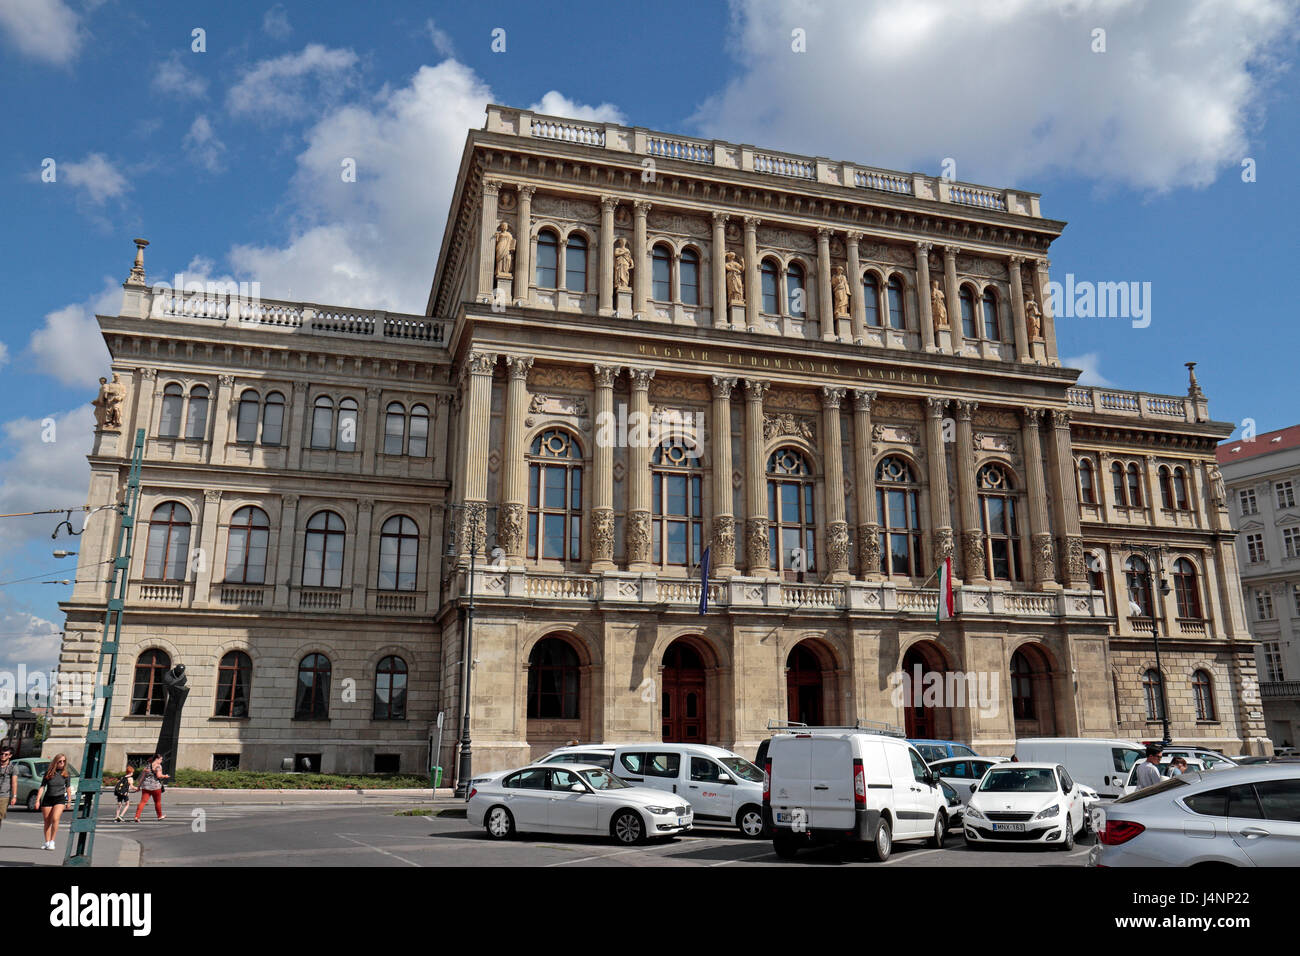 The Hungarian Academy of Sciences in Budapest, Hungary. Stock Photo